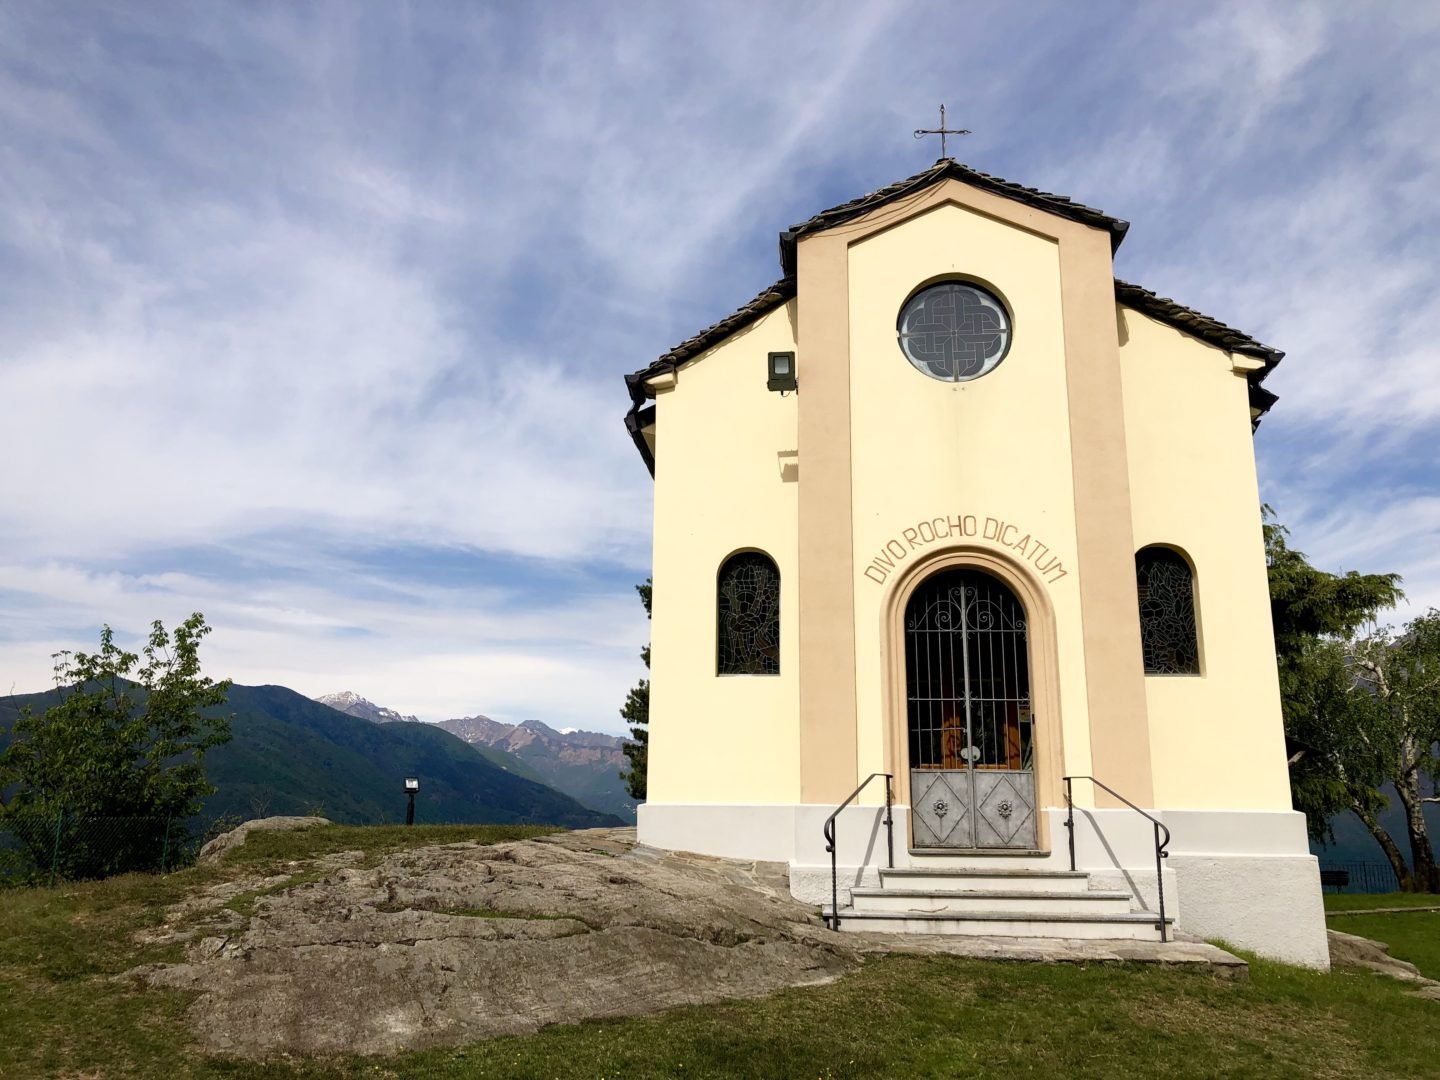 We started off just outside of Maccagno and parked up by a small church called Cheisa S Rocco 